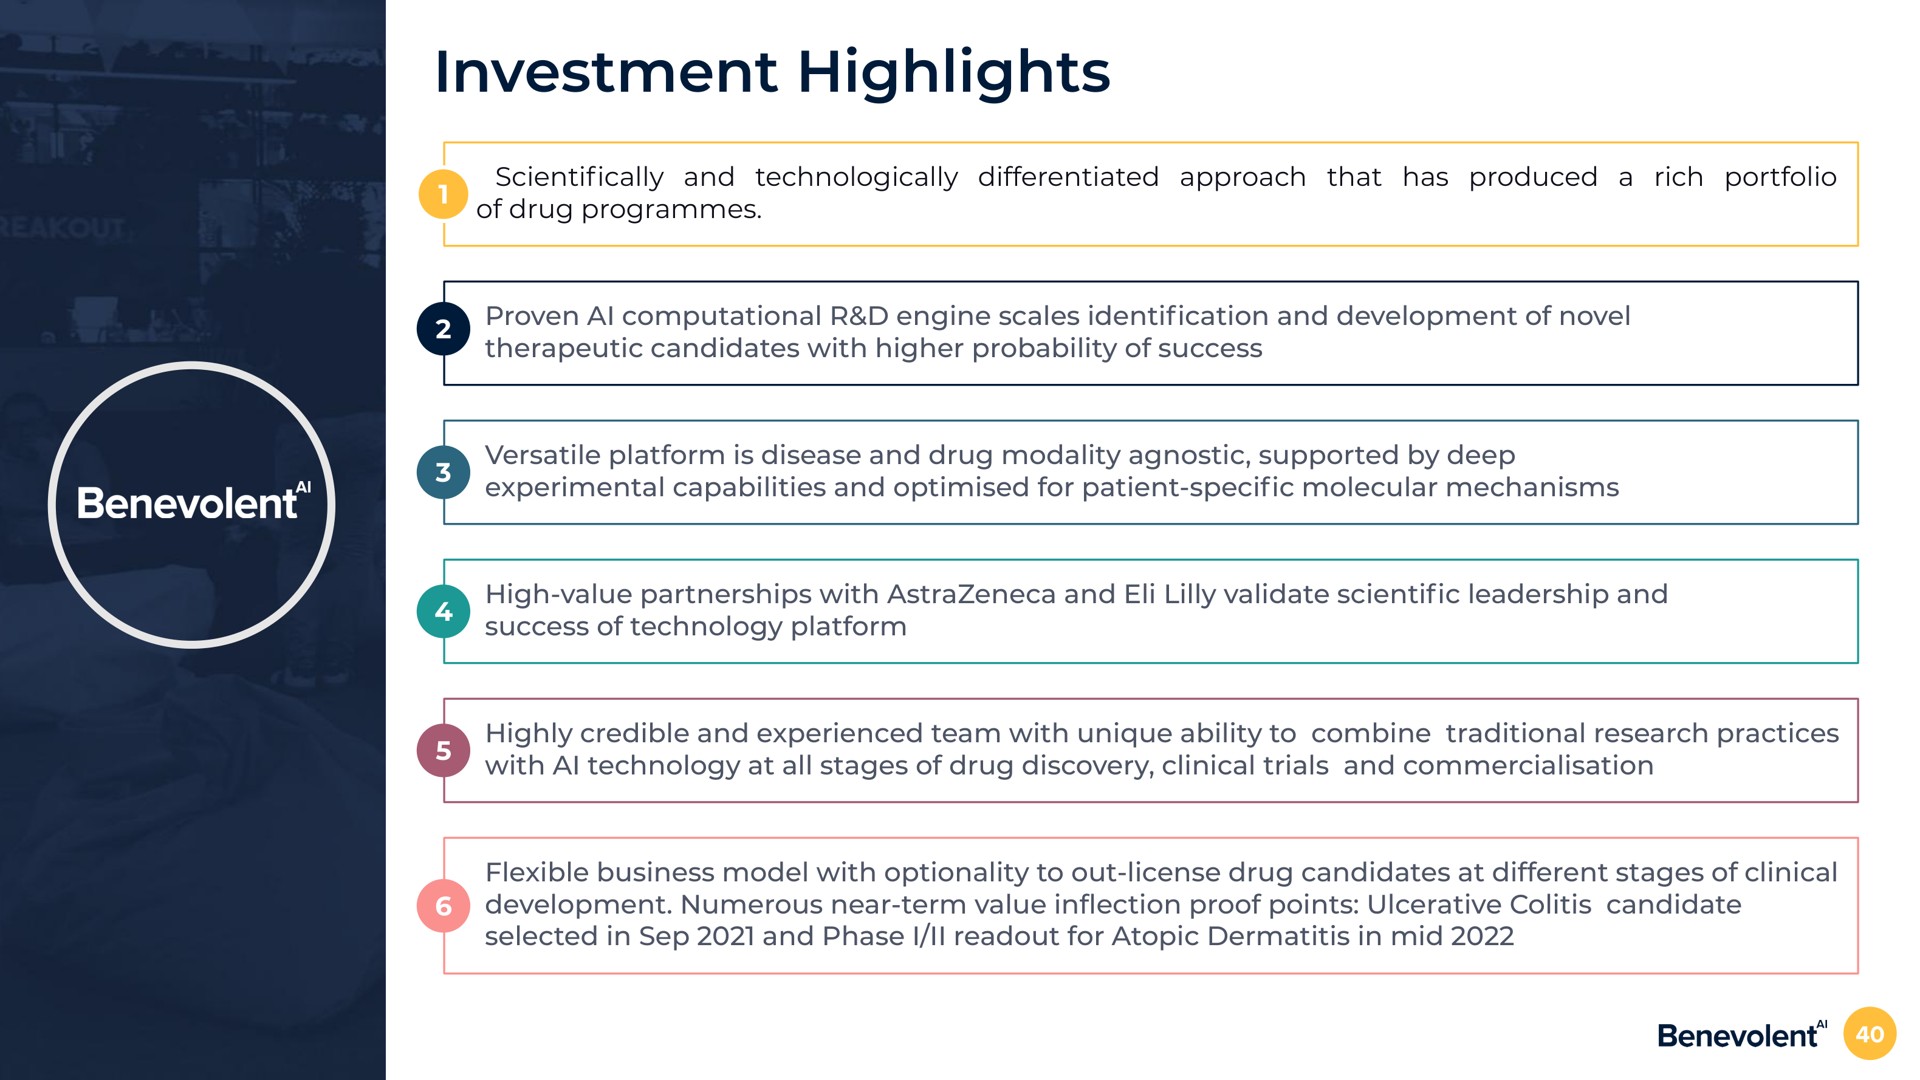 investment highlights and technologically differentiated approach that has produced a rich portfolio of drug programmes proven computational engine scales cation and development of novel therapeutic candidates with higher probability of success versatile platform is disease and drug modality agnostic supported by deep experimental capabilities and for patient molecular mechanisms high value partnerships with and validate leadership and success of technology platform highly credible and experienced team with unique ability to combine traditional research practices with technology at all stages of drug discovery clinical trials and flexible business model with optionality to out license drug candidates at different stages of clinical development numerous near term value in proof points ulcerative colitis candidate selected in and phase i for atopic dermatitis in mid | BenevolentAI